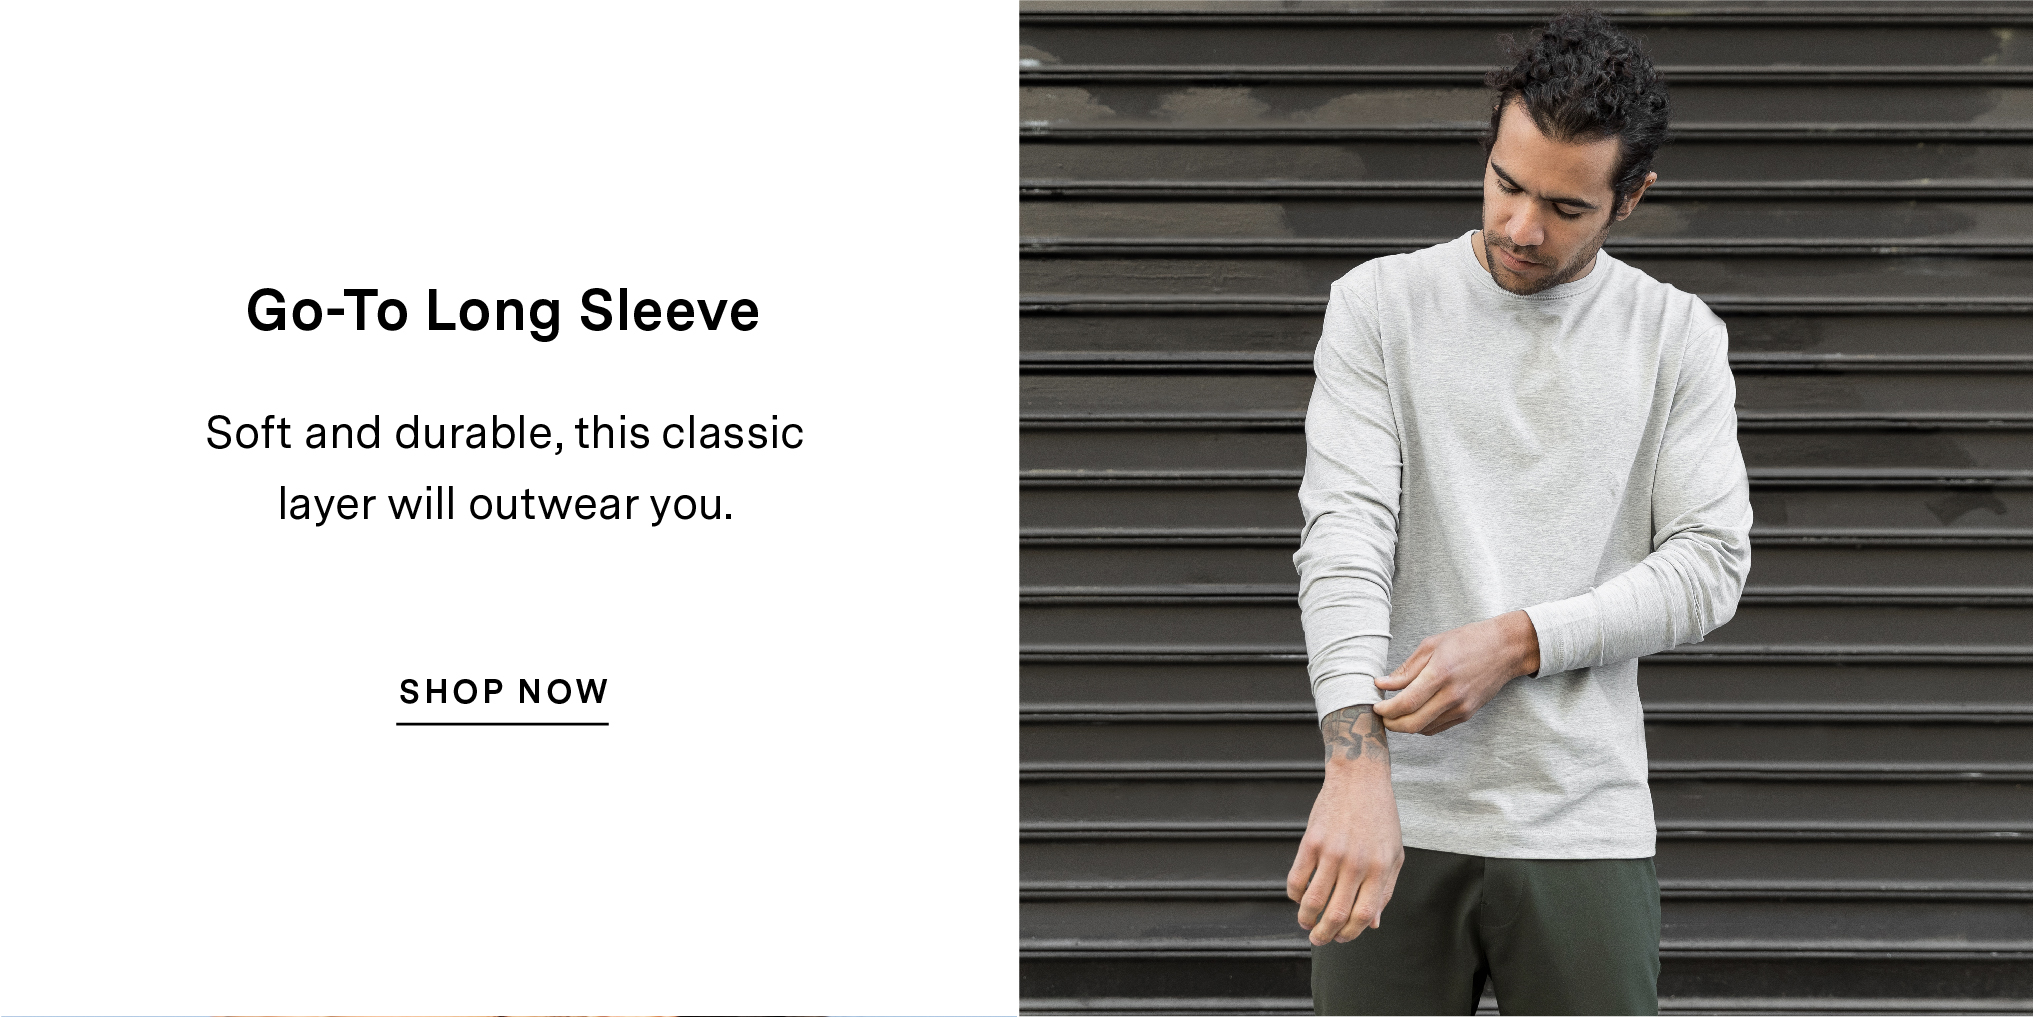 Go-To Long Sleeve - Soft and durable, this classic layer will outwear you.